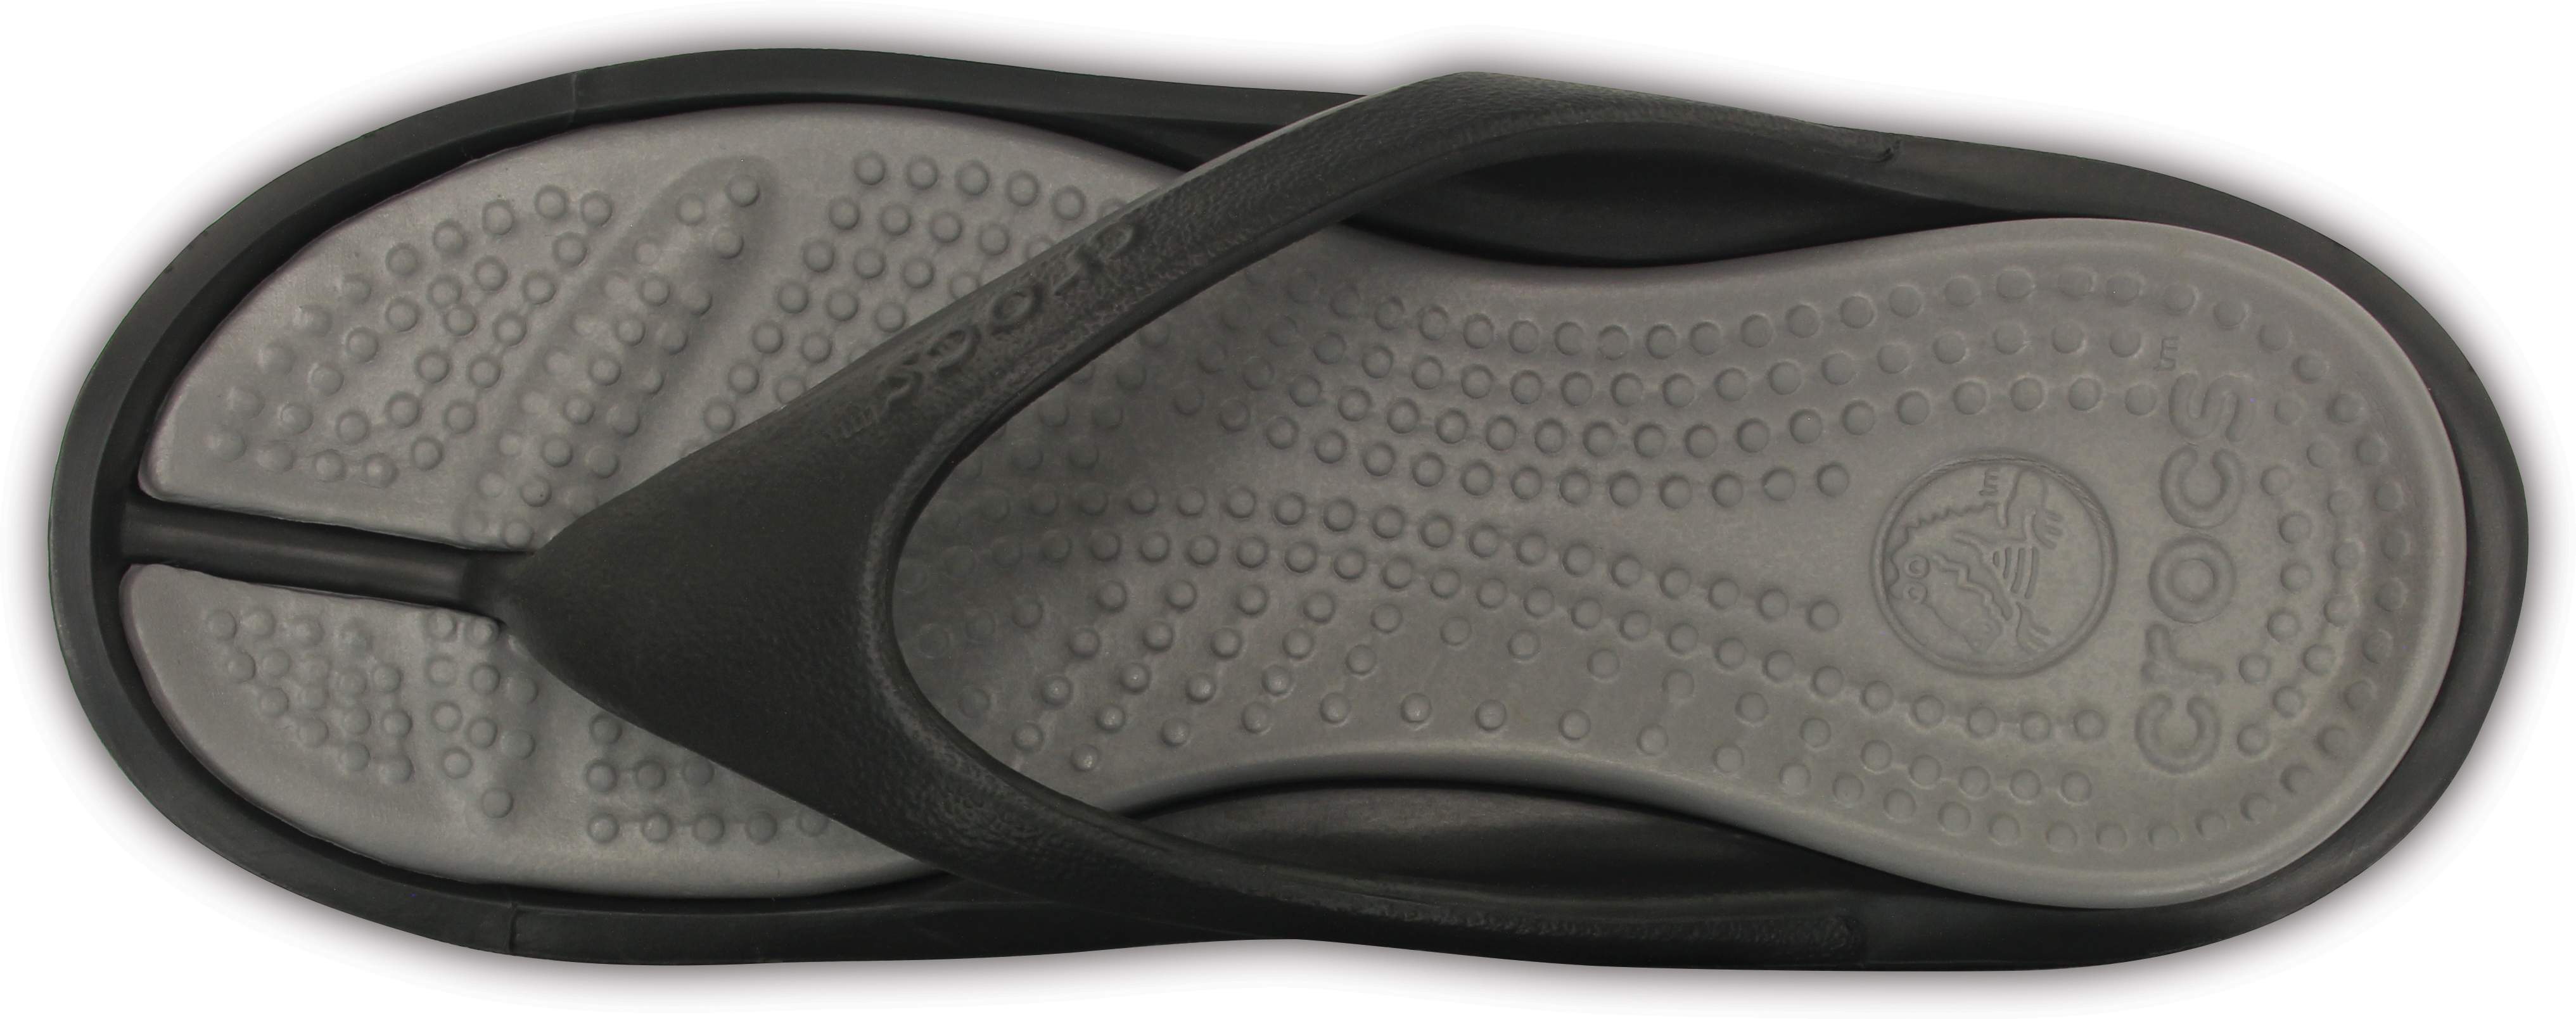 croc flip flops with arch support